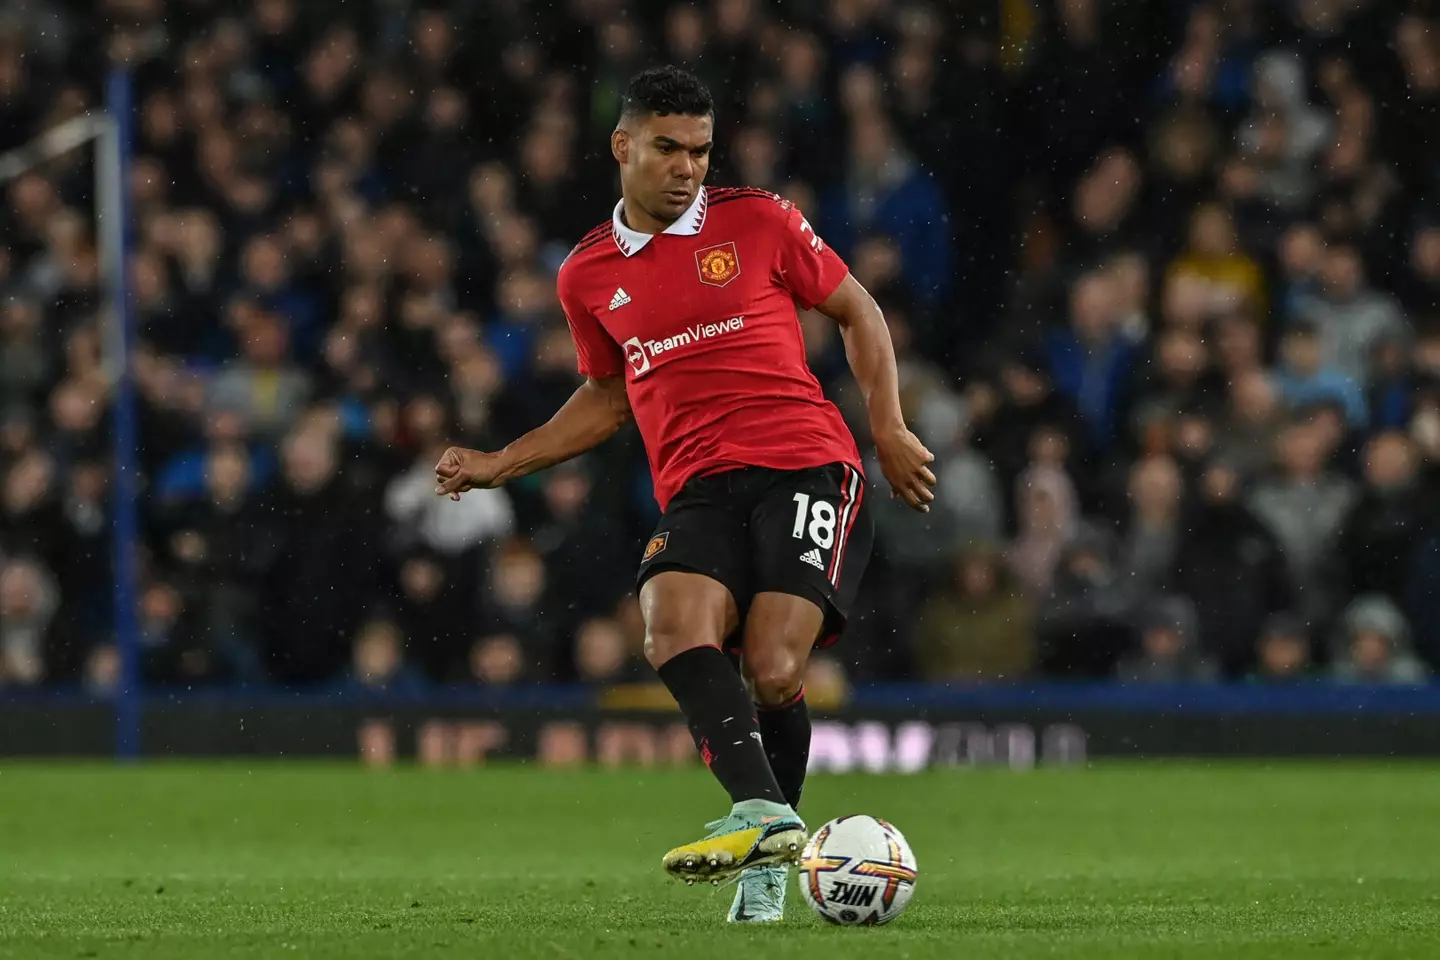 Casemiro is likely to have an extended run in the United team. (Image